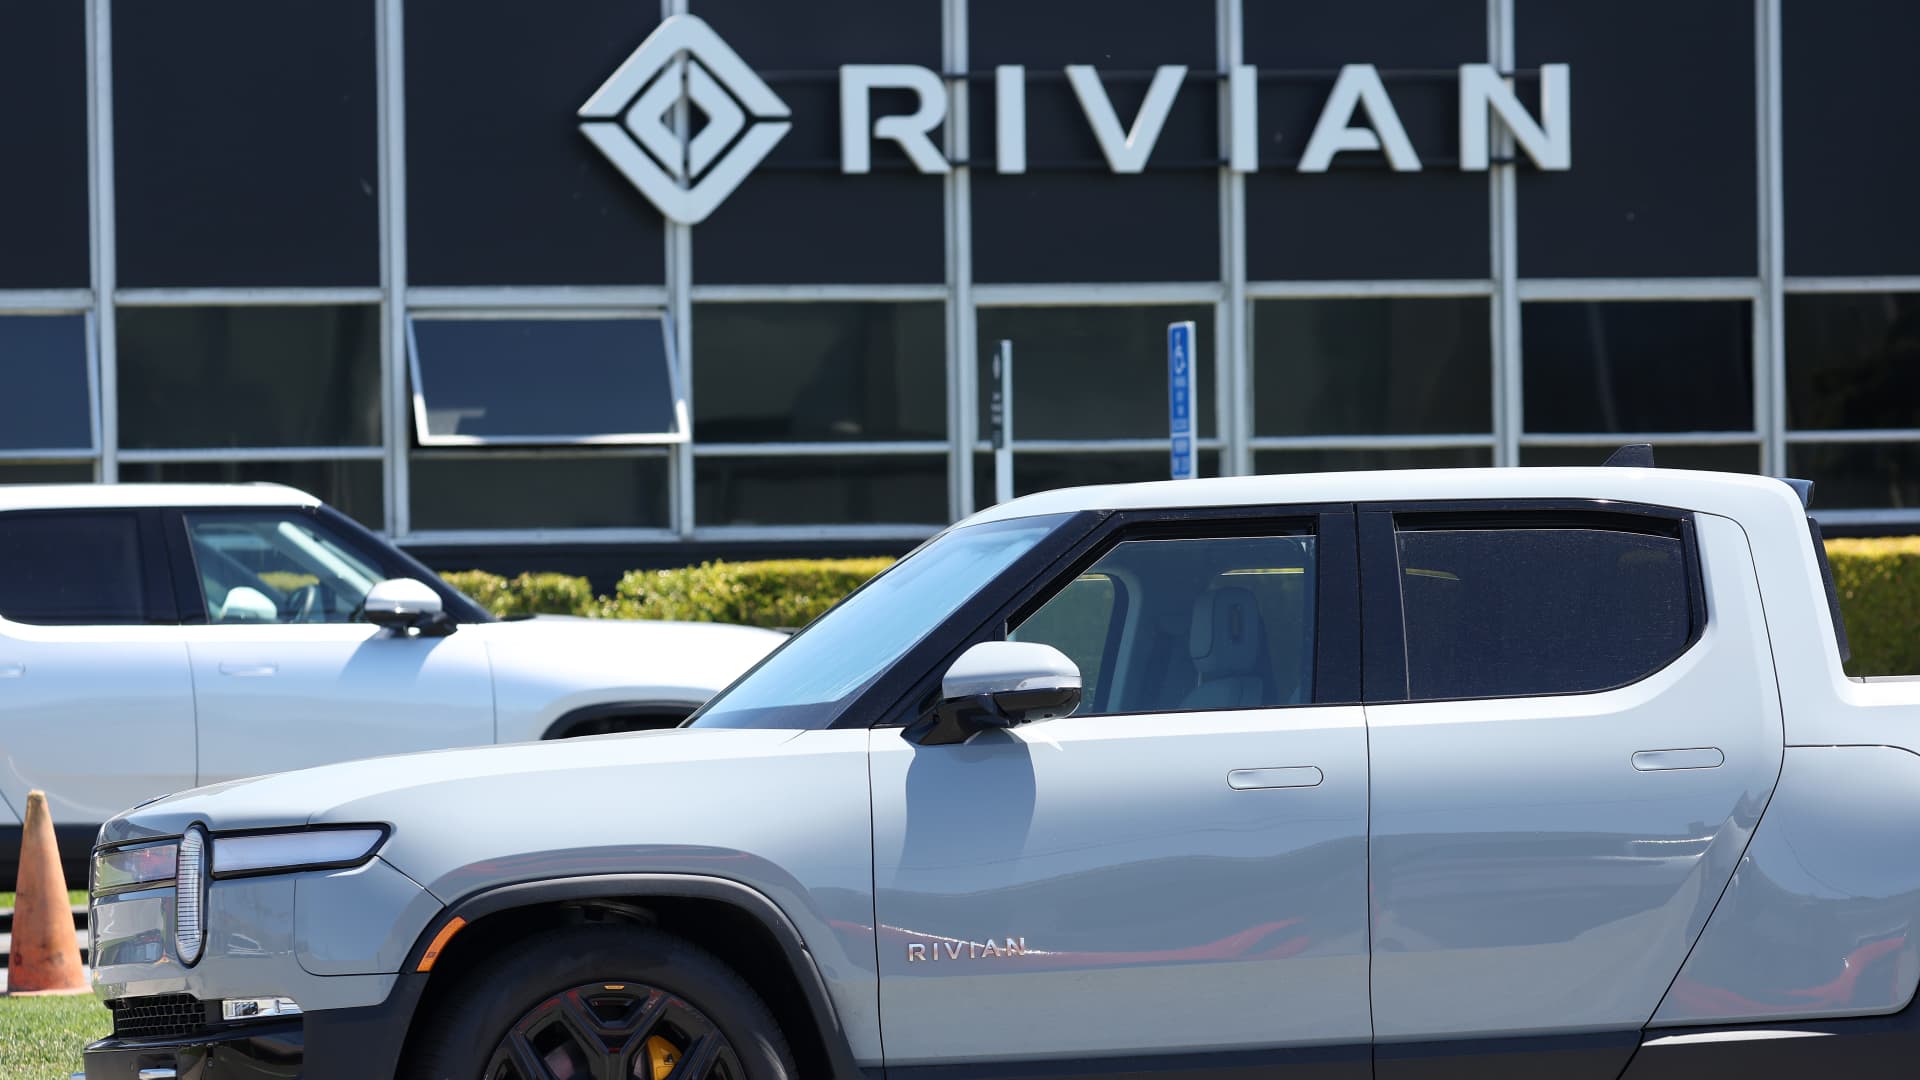 Rivian and Lucid shares plunge after weak EV earnings reports